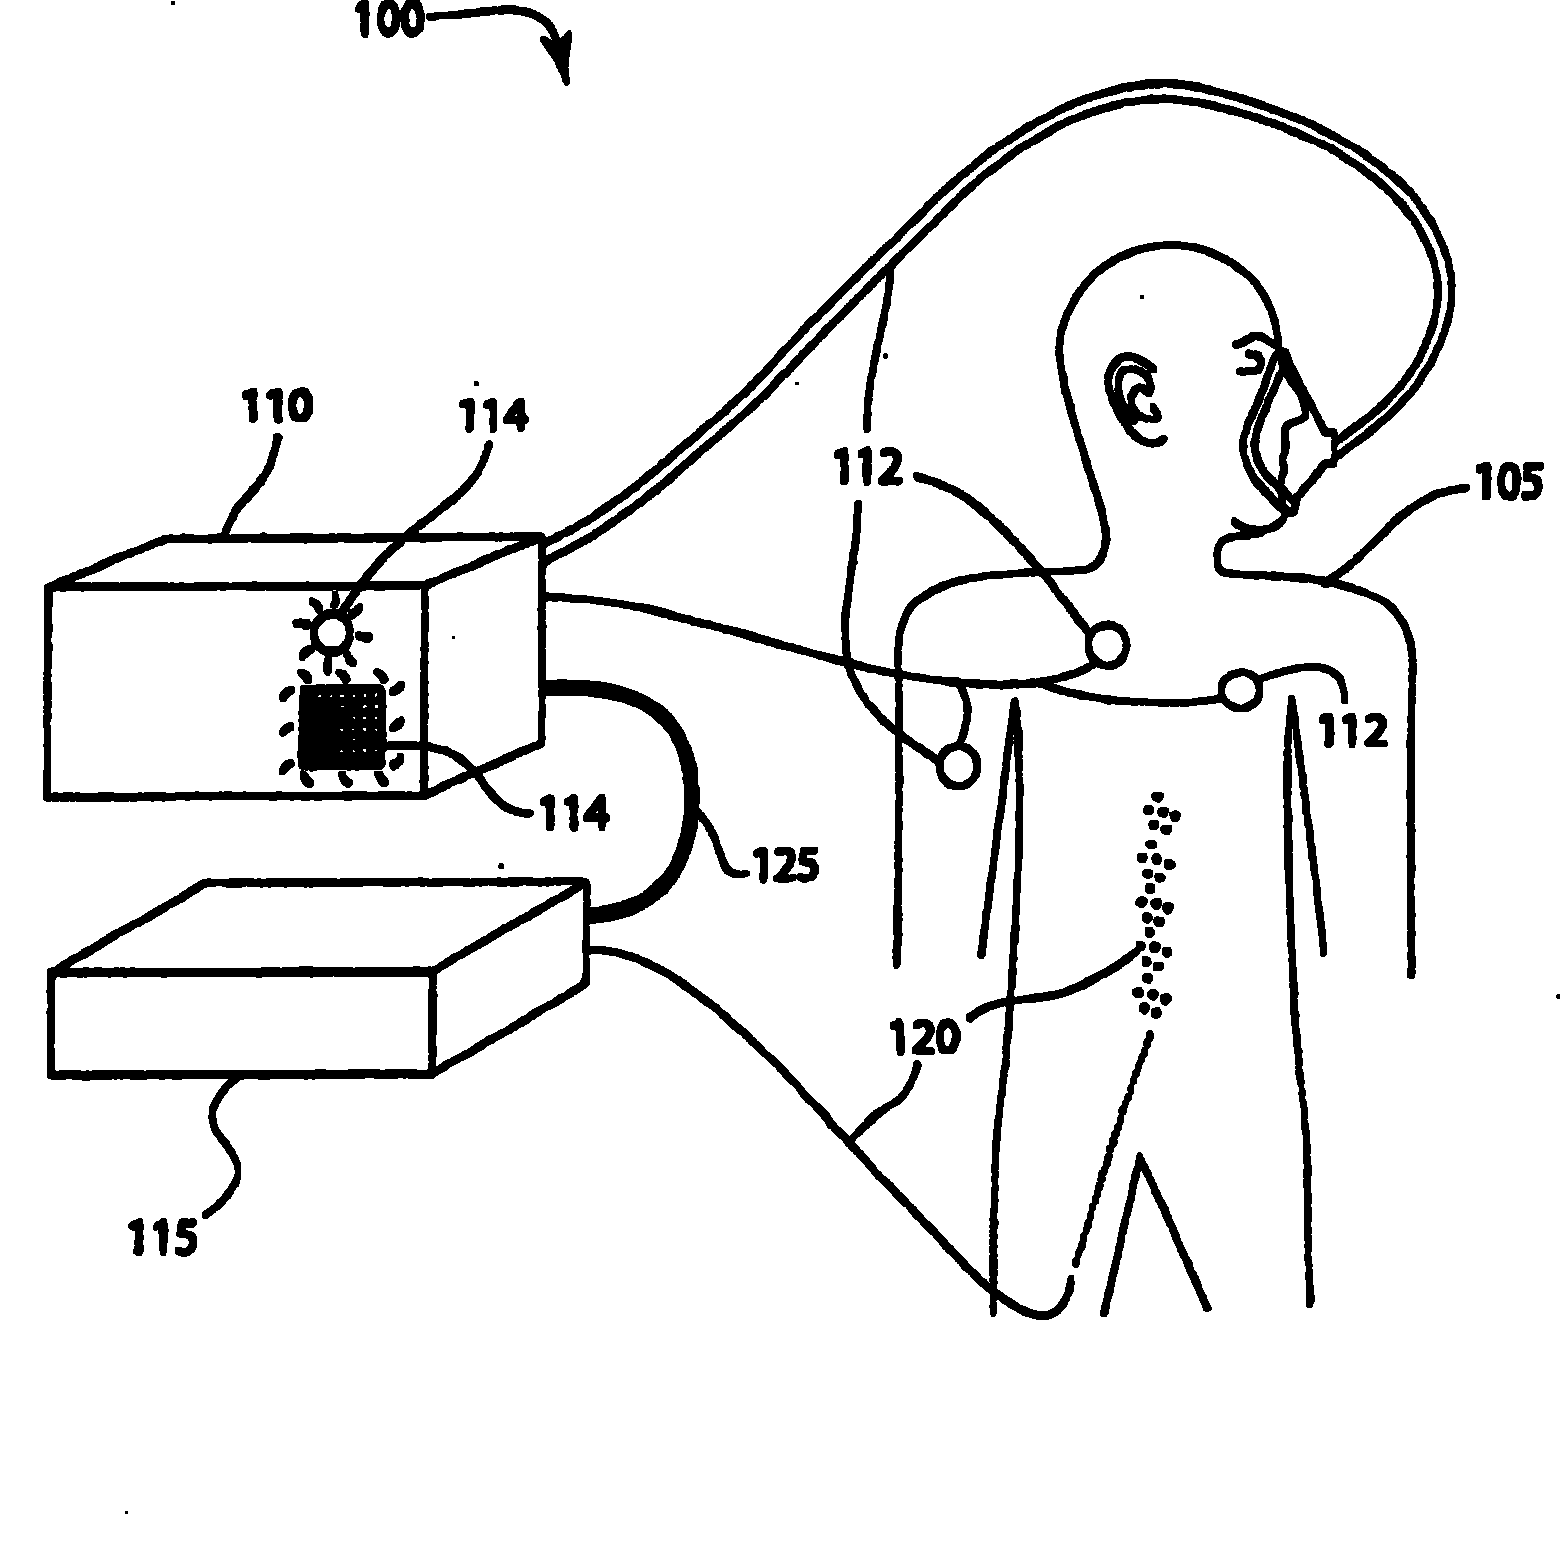 System and method of modular integration of intravascular gas exchange catheter with respiratory monitor and ventilator